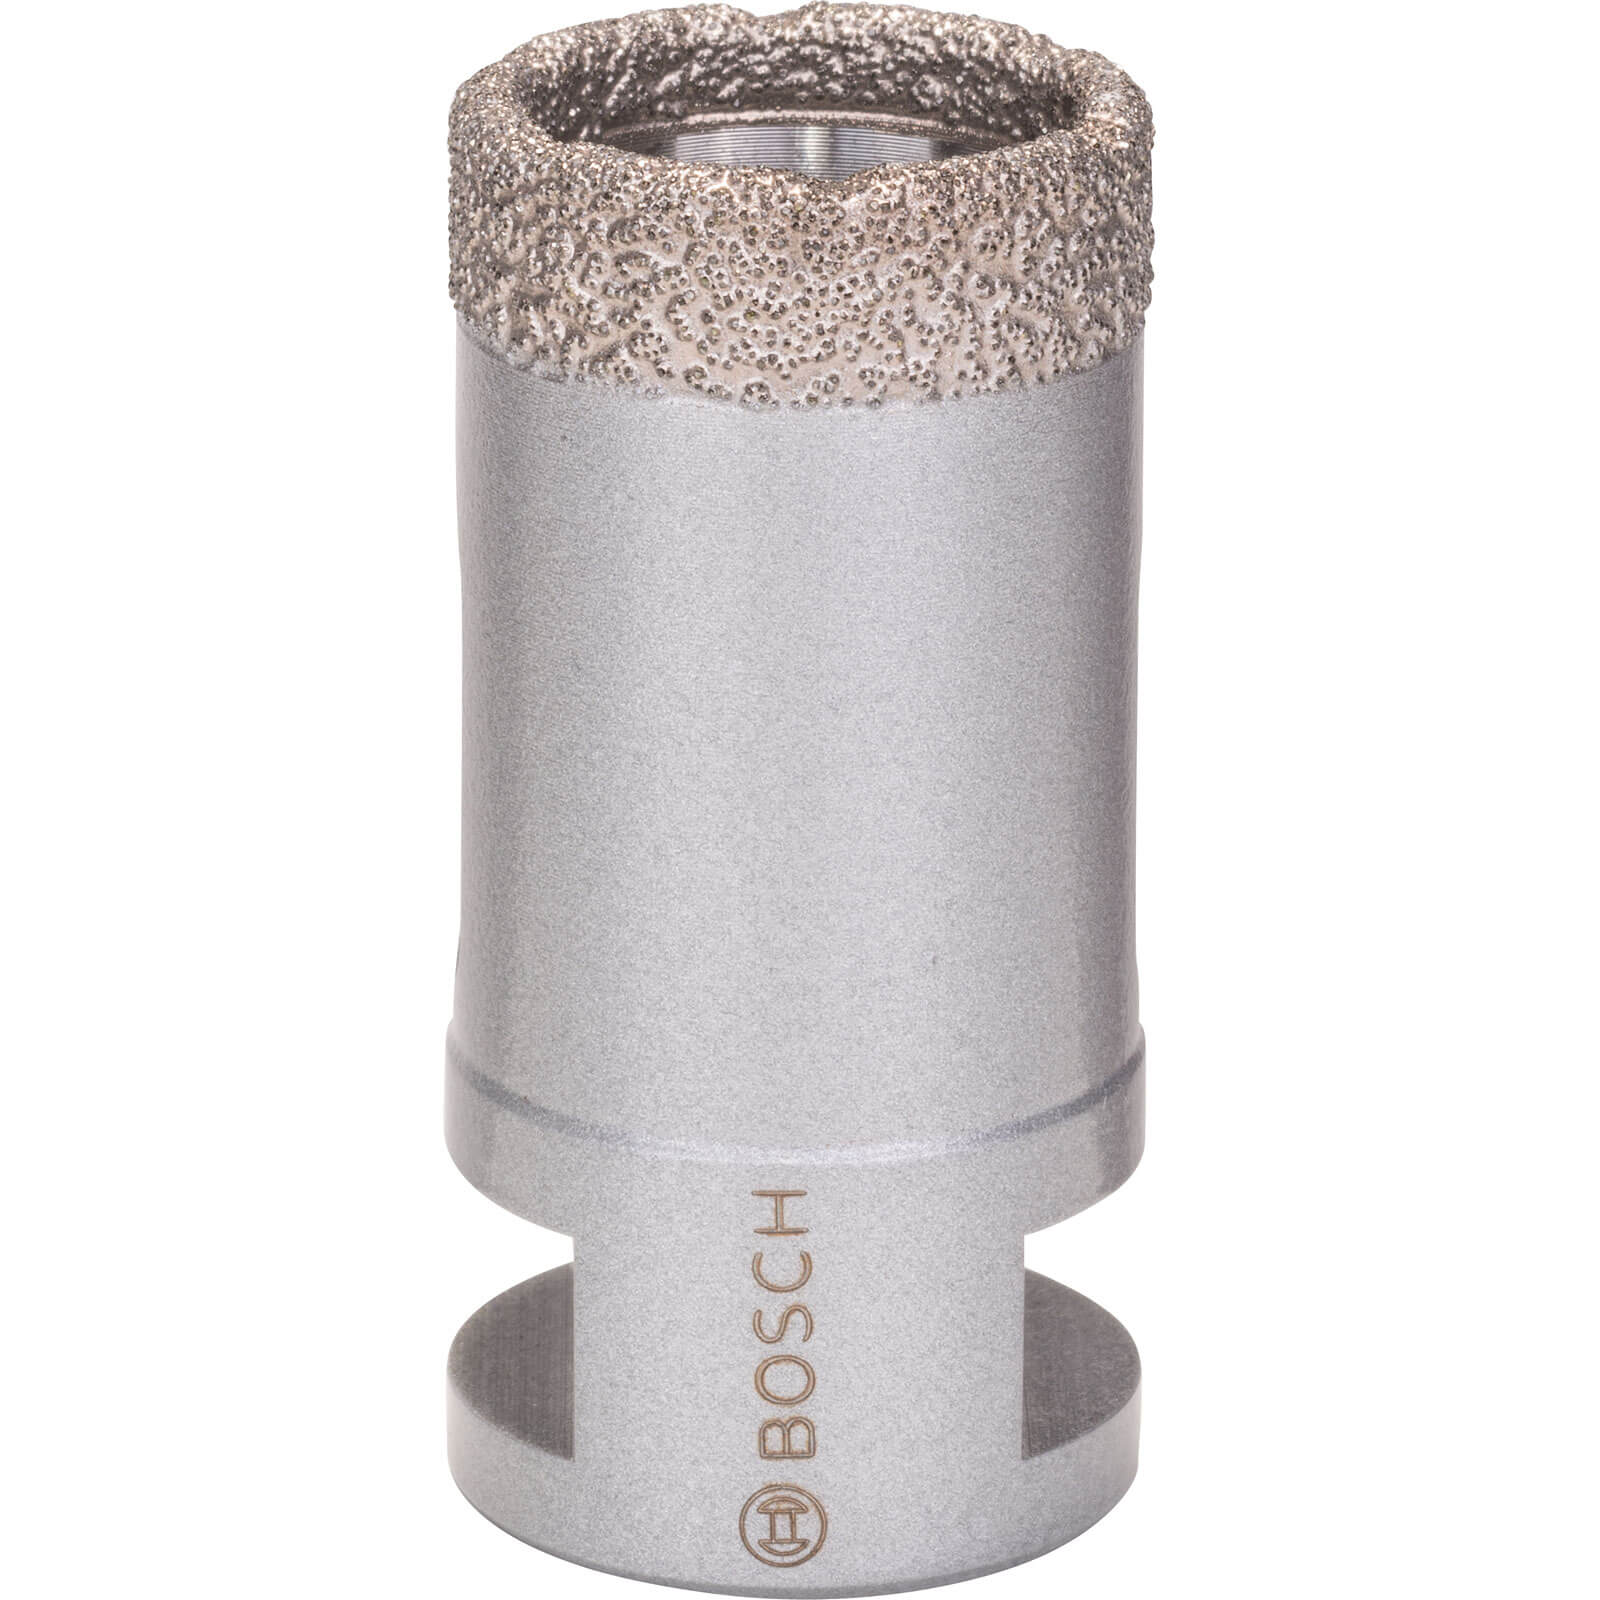 Image of Bosch Angle Grinder Dry Diamond Hole Cutter For Ceramics 30mm